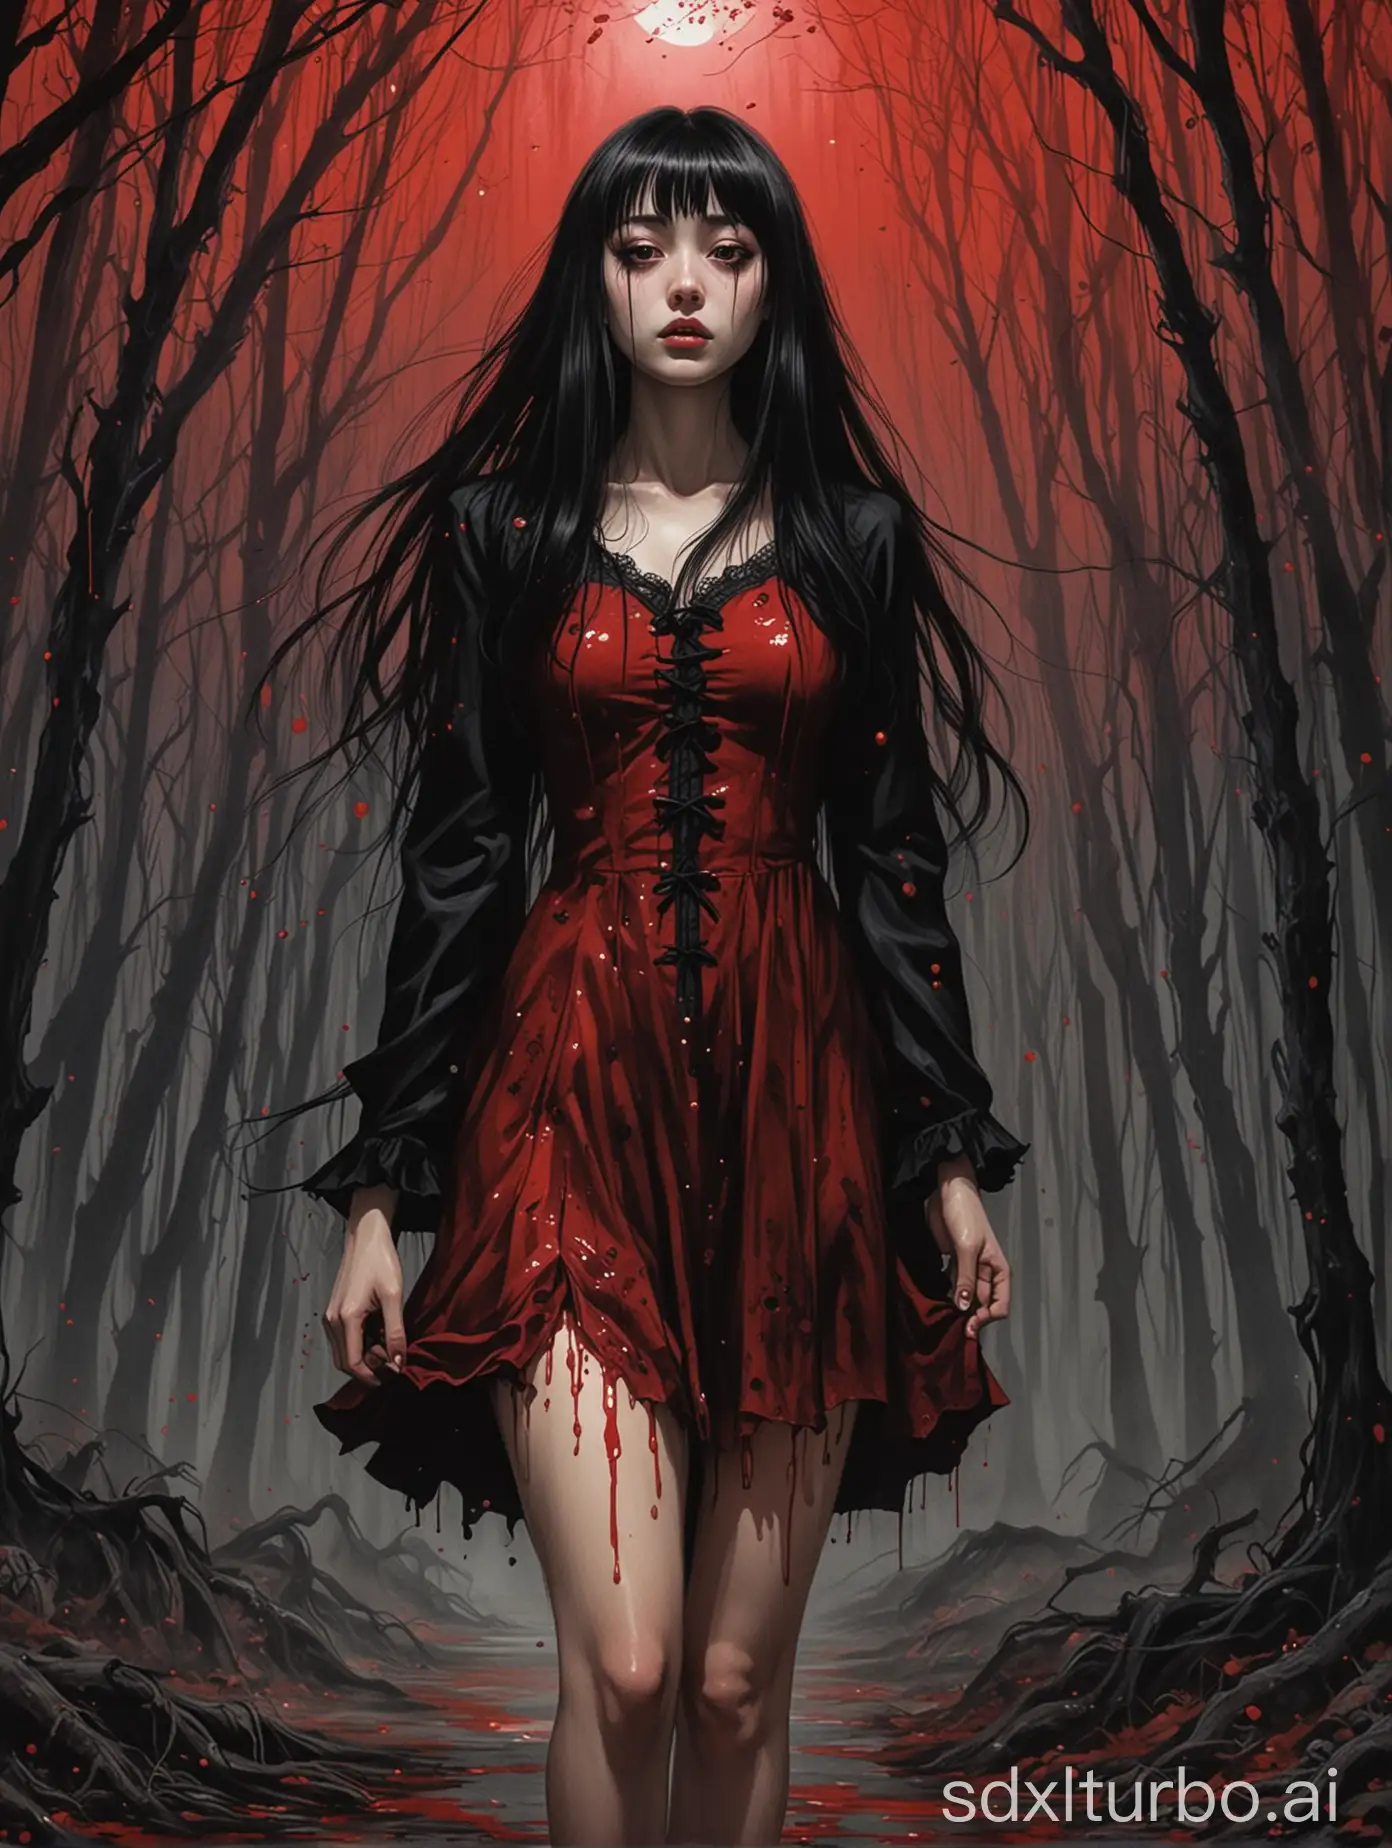 Eerie-Horror-Scene-Girl-with-Black-Hair-in-Red-Dress-Amidst-Macabre-Landscape